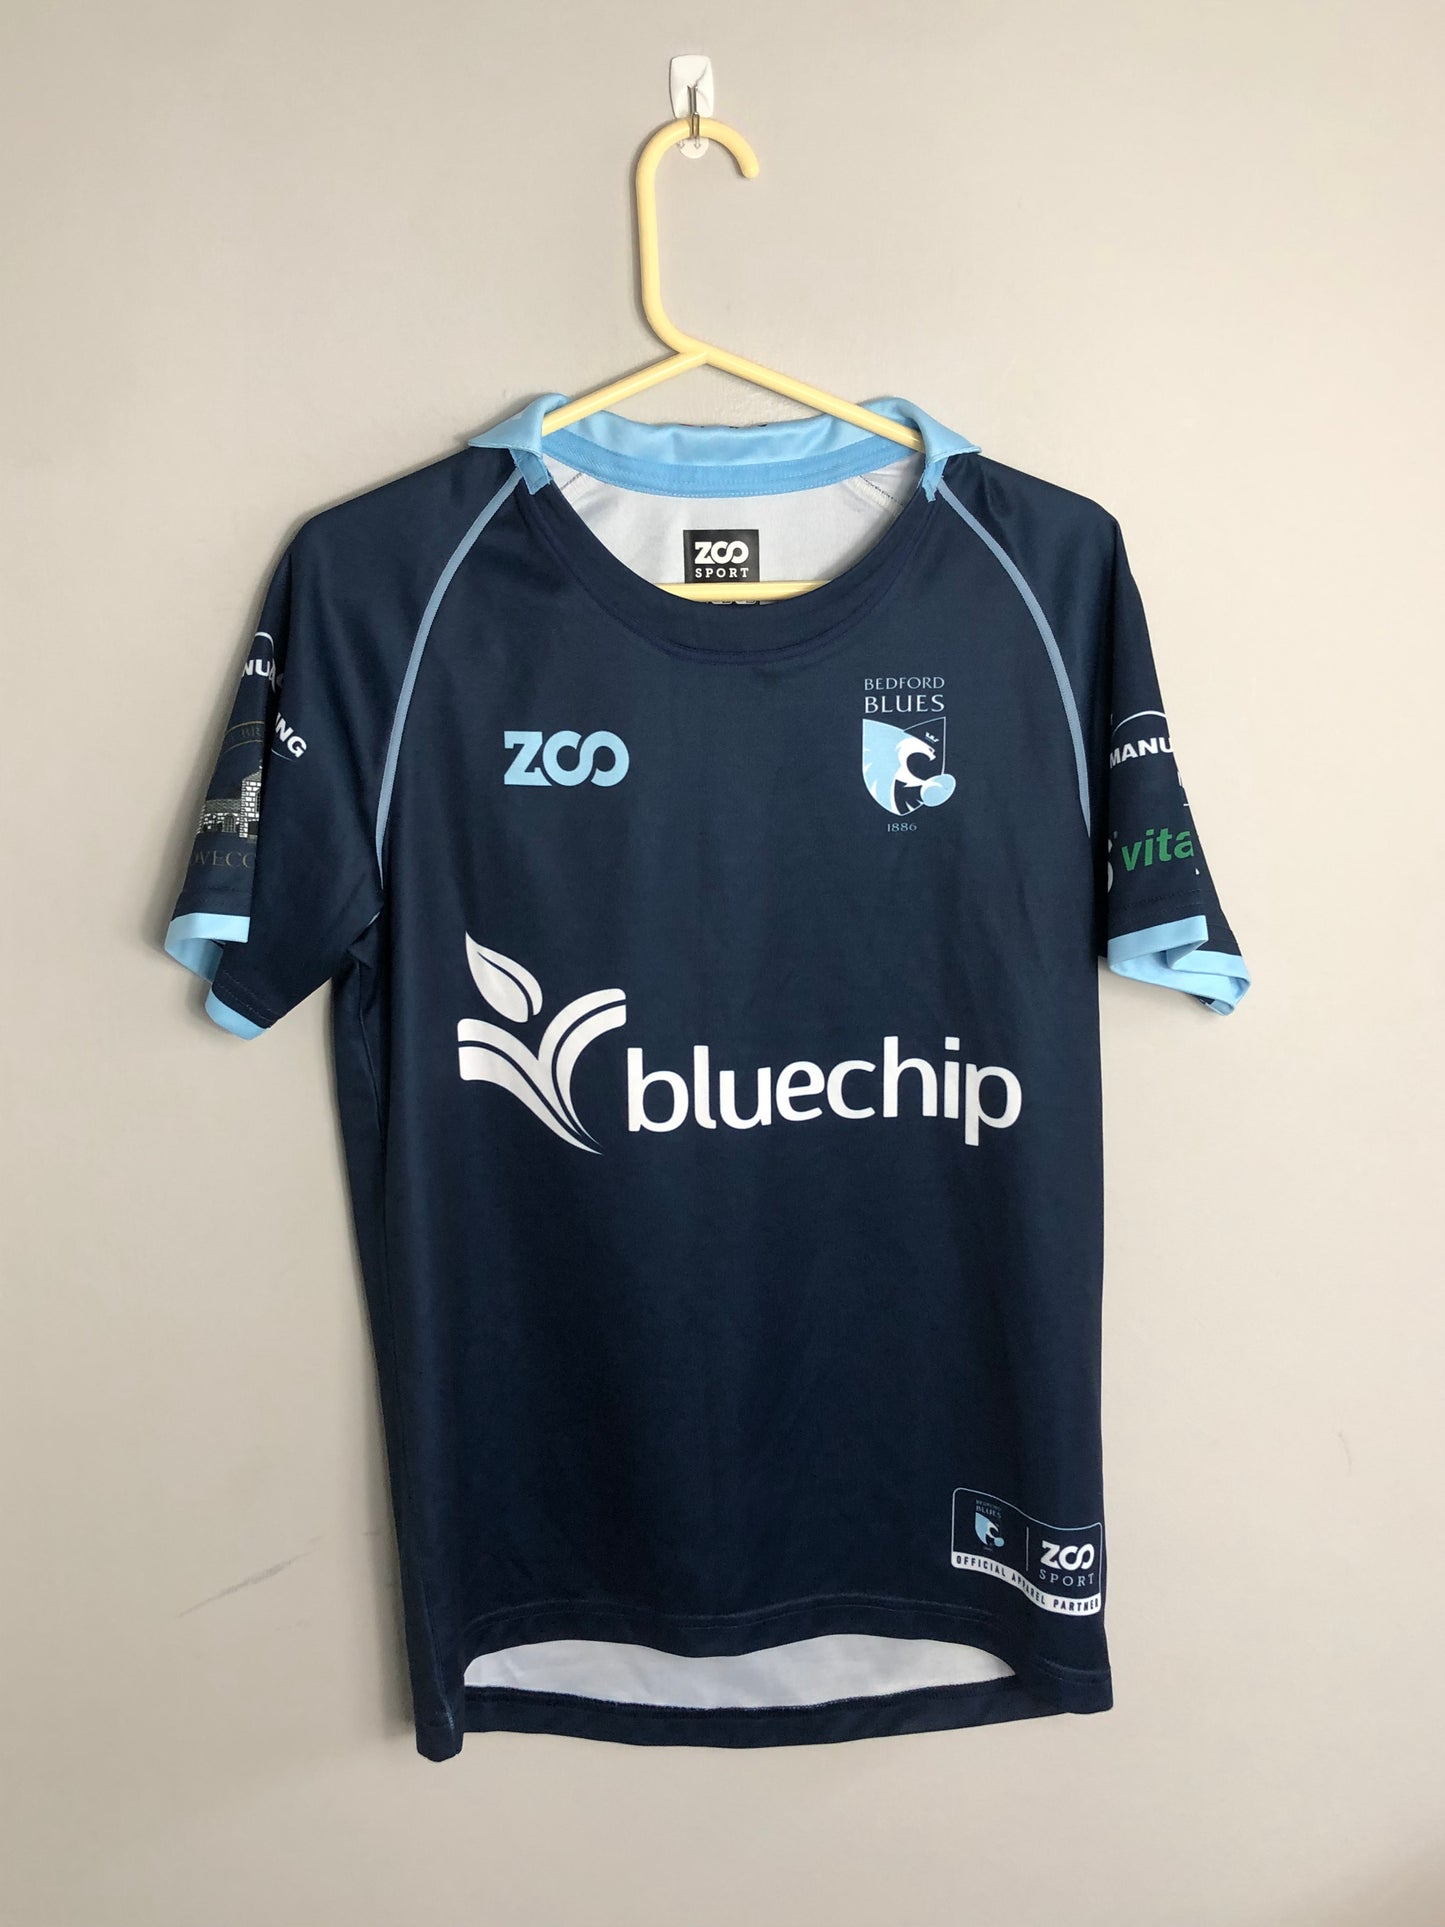 Bedford Blues Home Shirt - 14 Years - 36” Chest